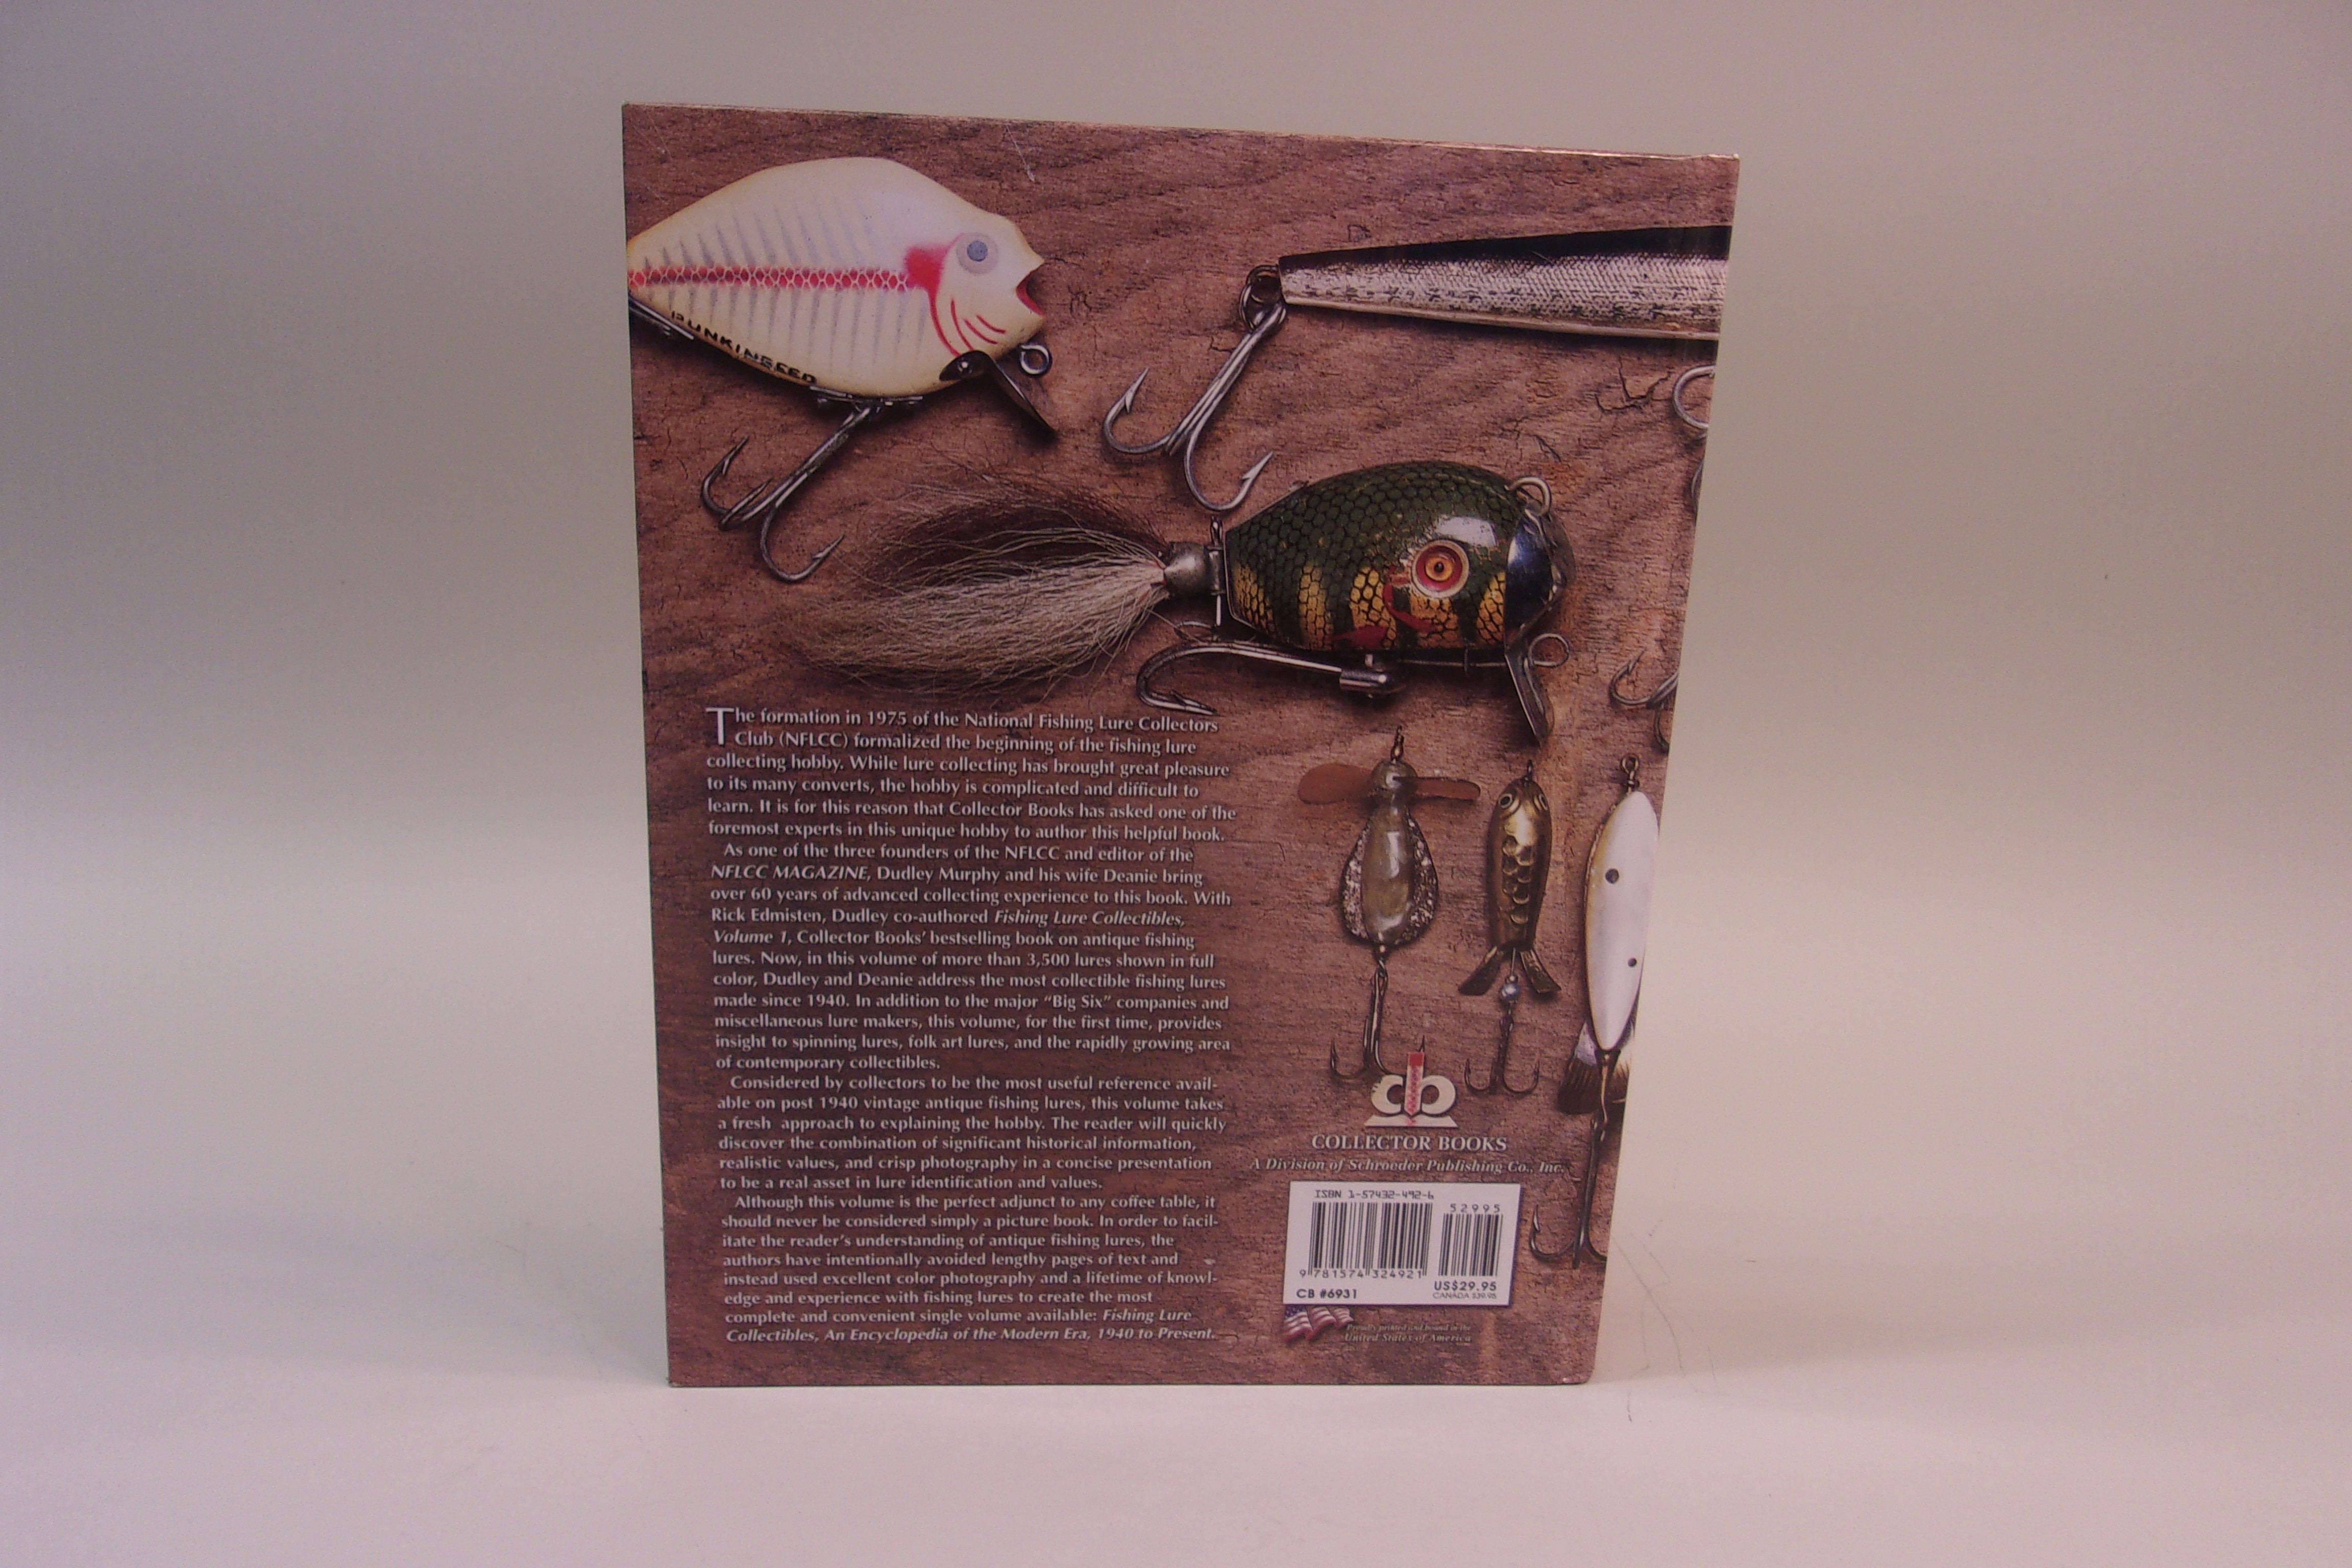 Fishing Lure Collectibles, Encyclopedia of Modern Era 1940 to